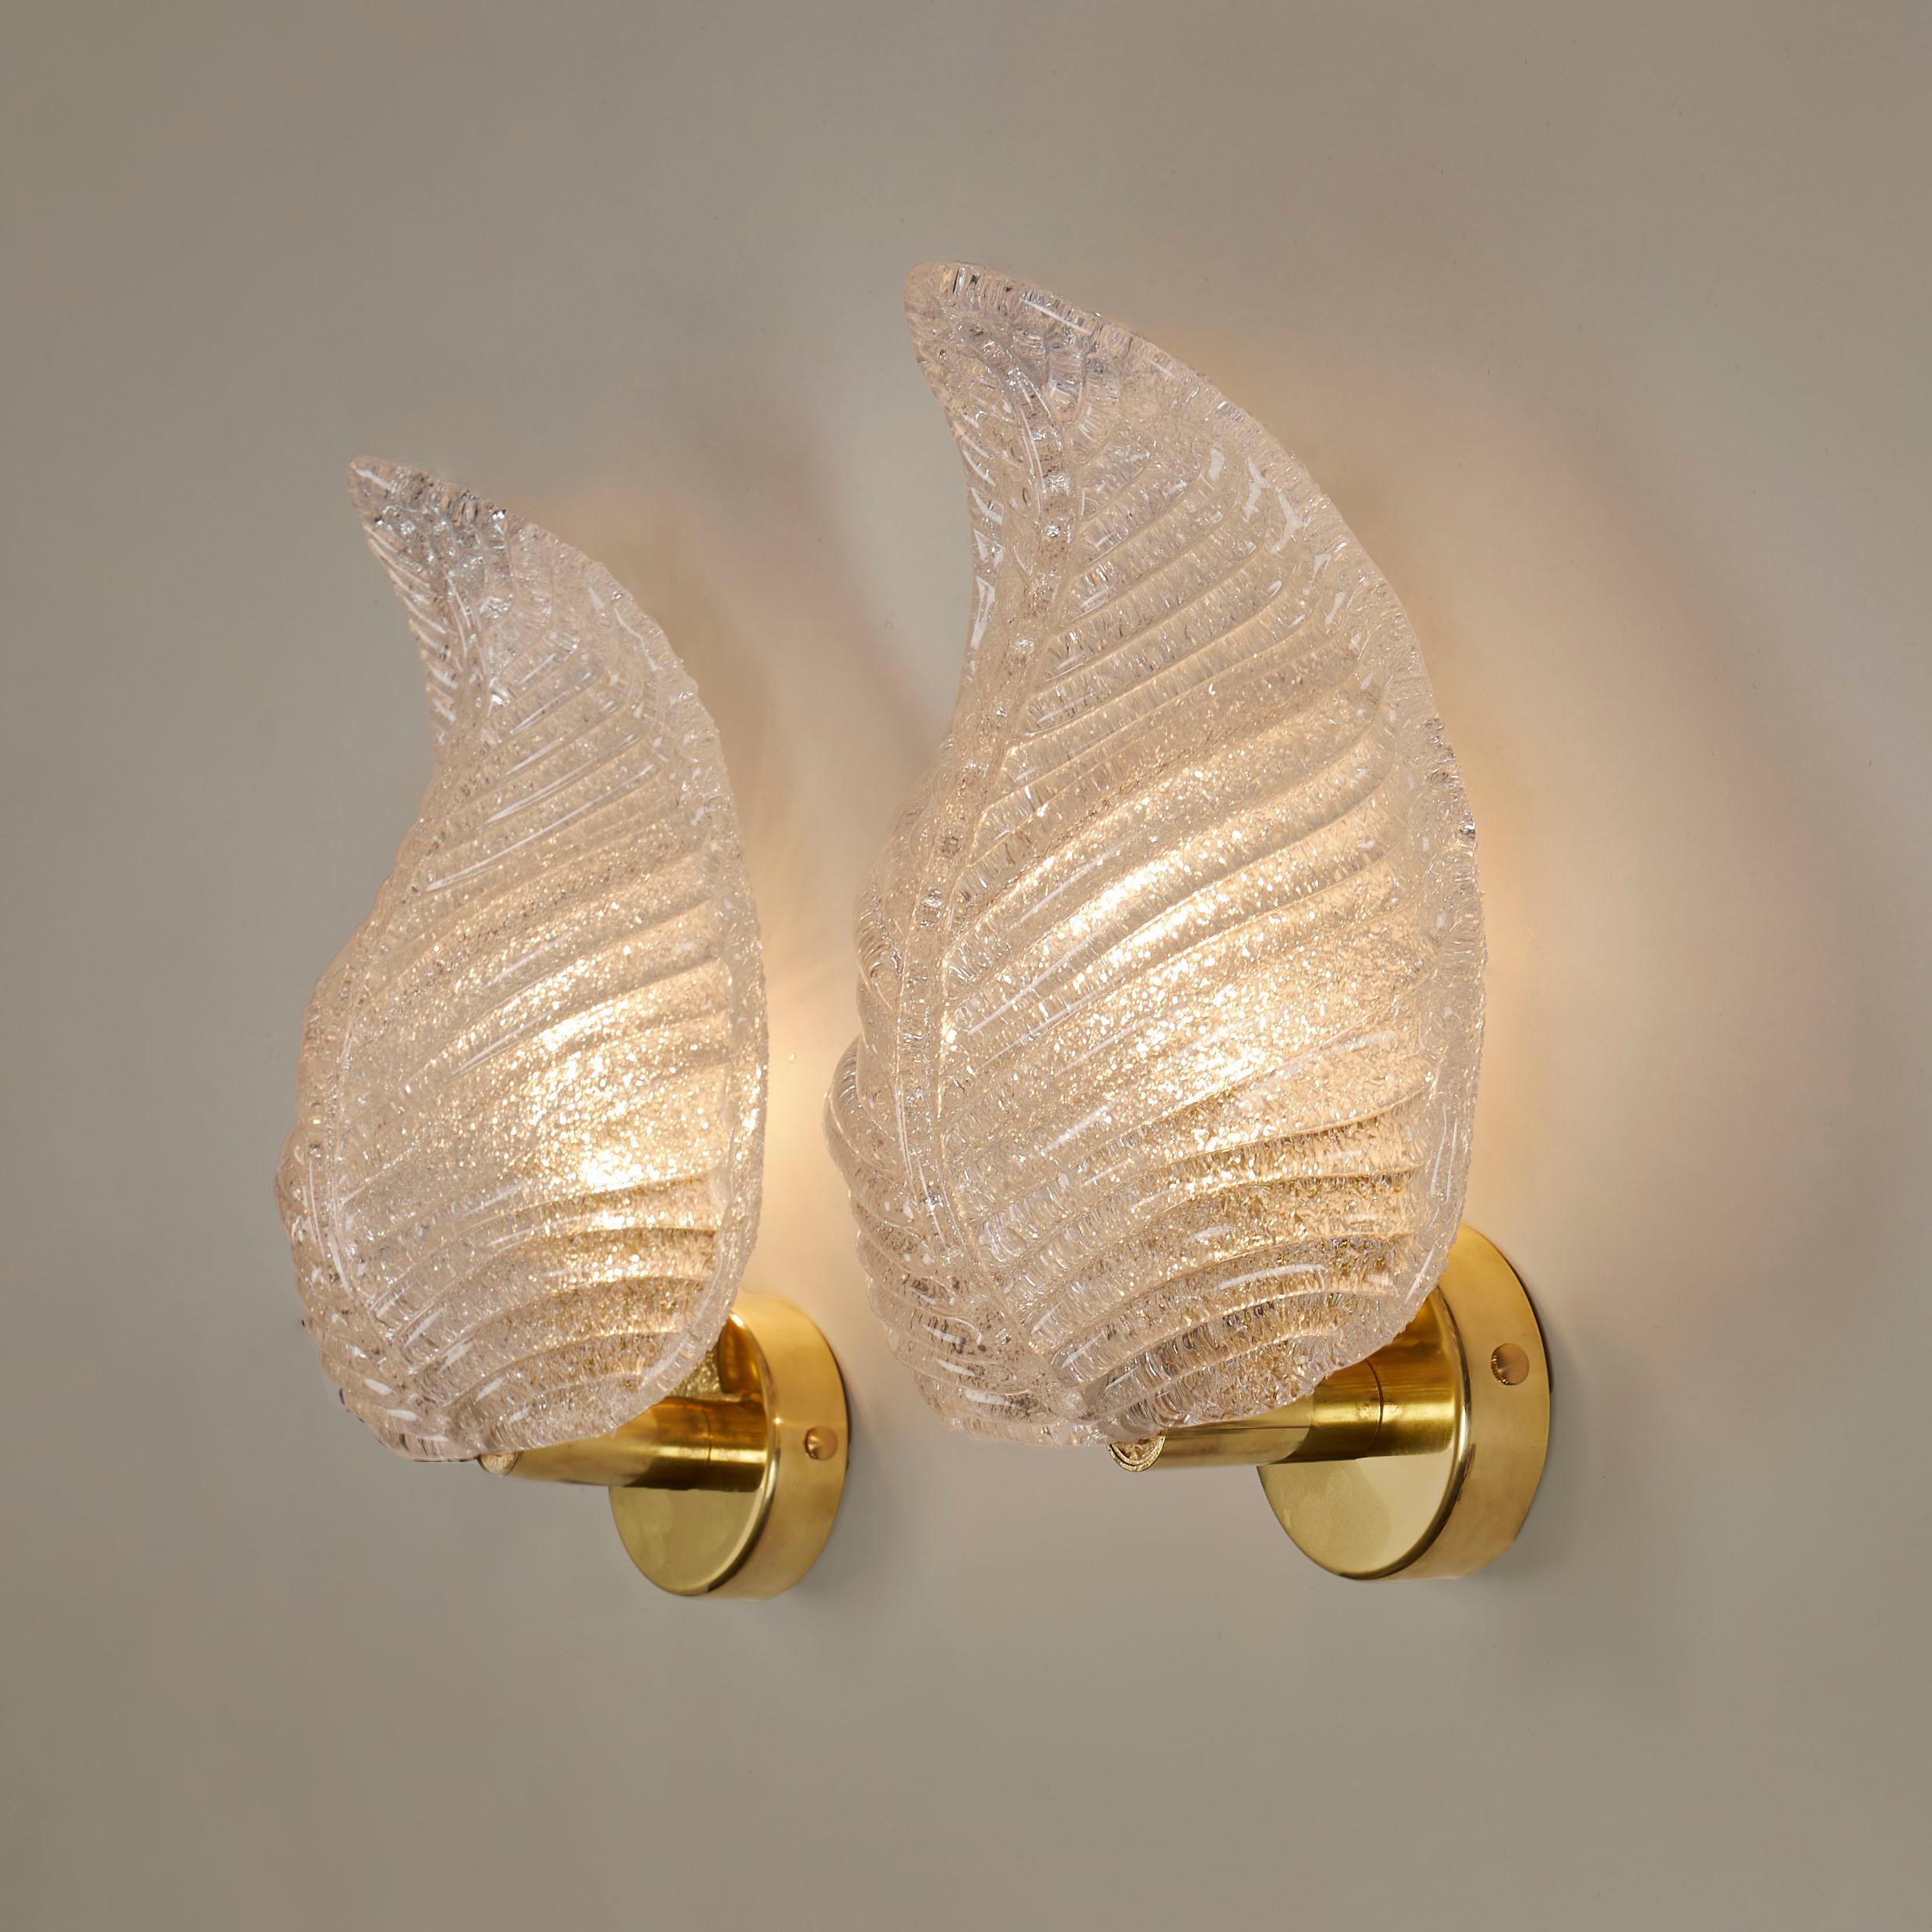 Pair of Italian Murano Textured Leaf Wall Lights In Excellent Condition For Sale In London, GB